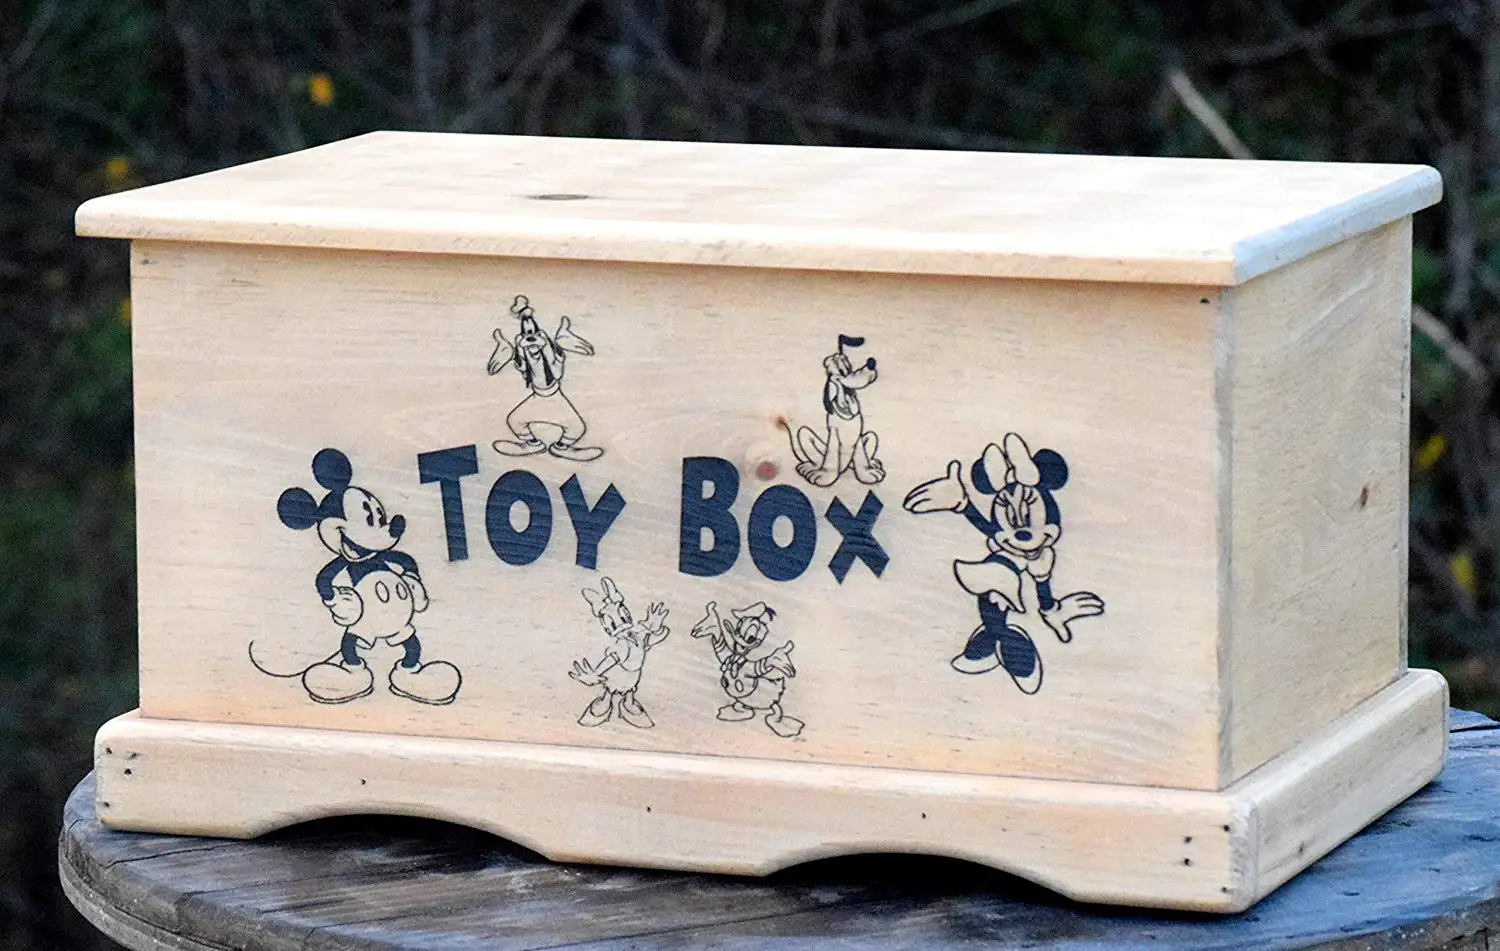 baby girl toy chest